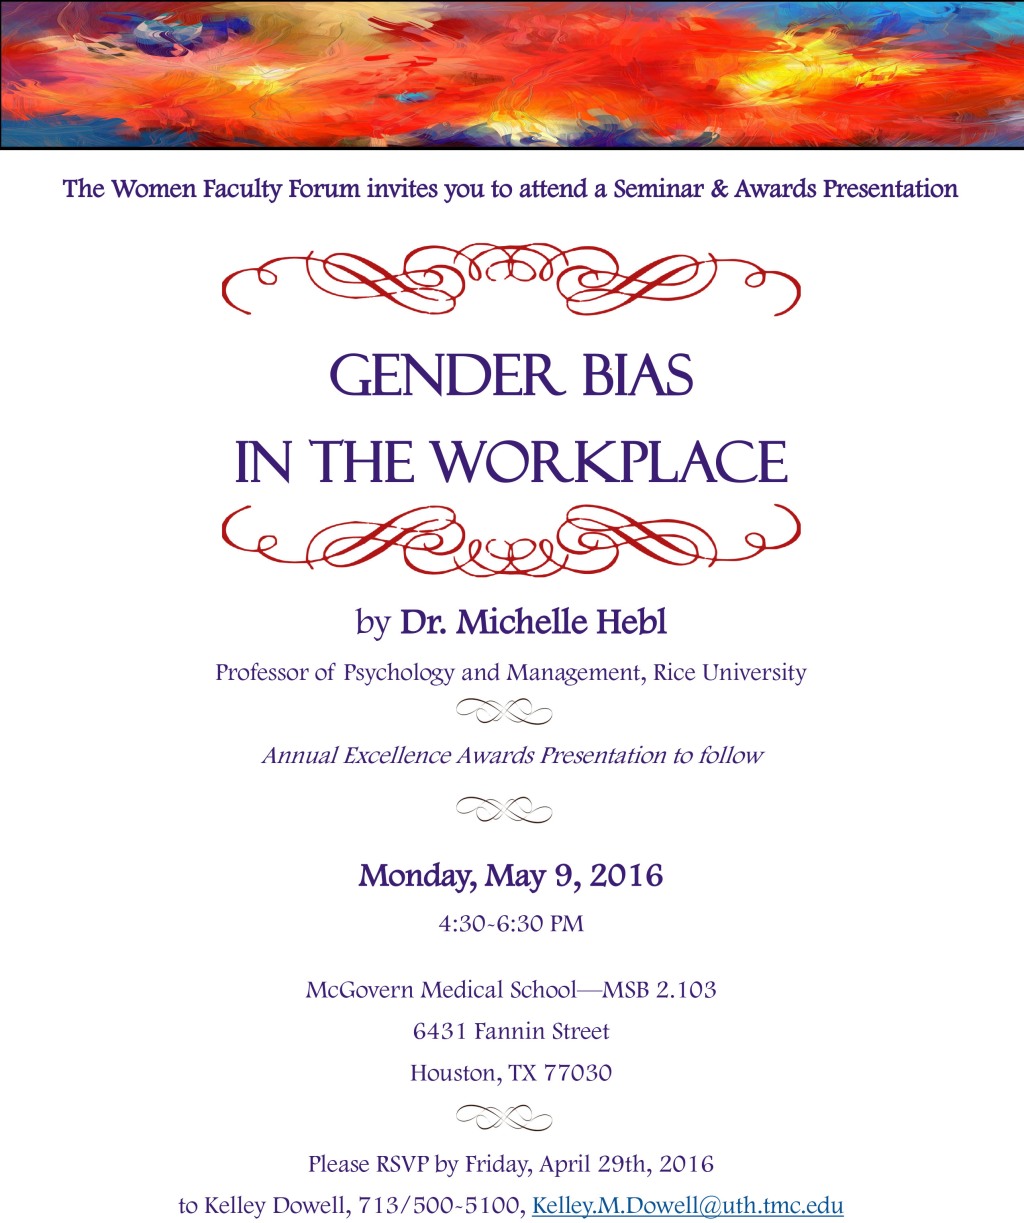 UTHealth Women Faculty Forum presents "Gender Bias in the Workplace"